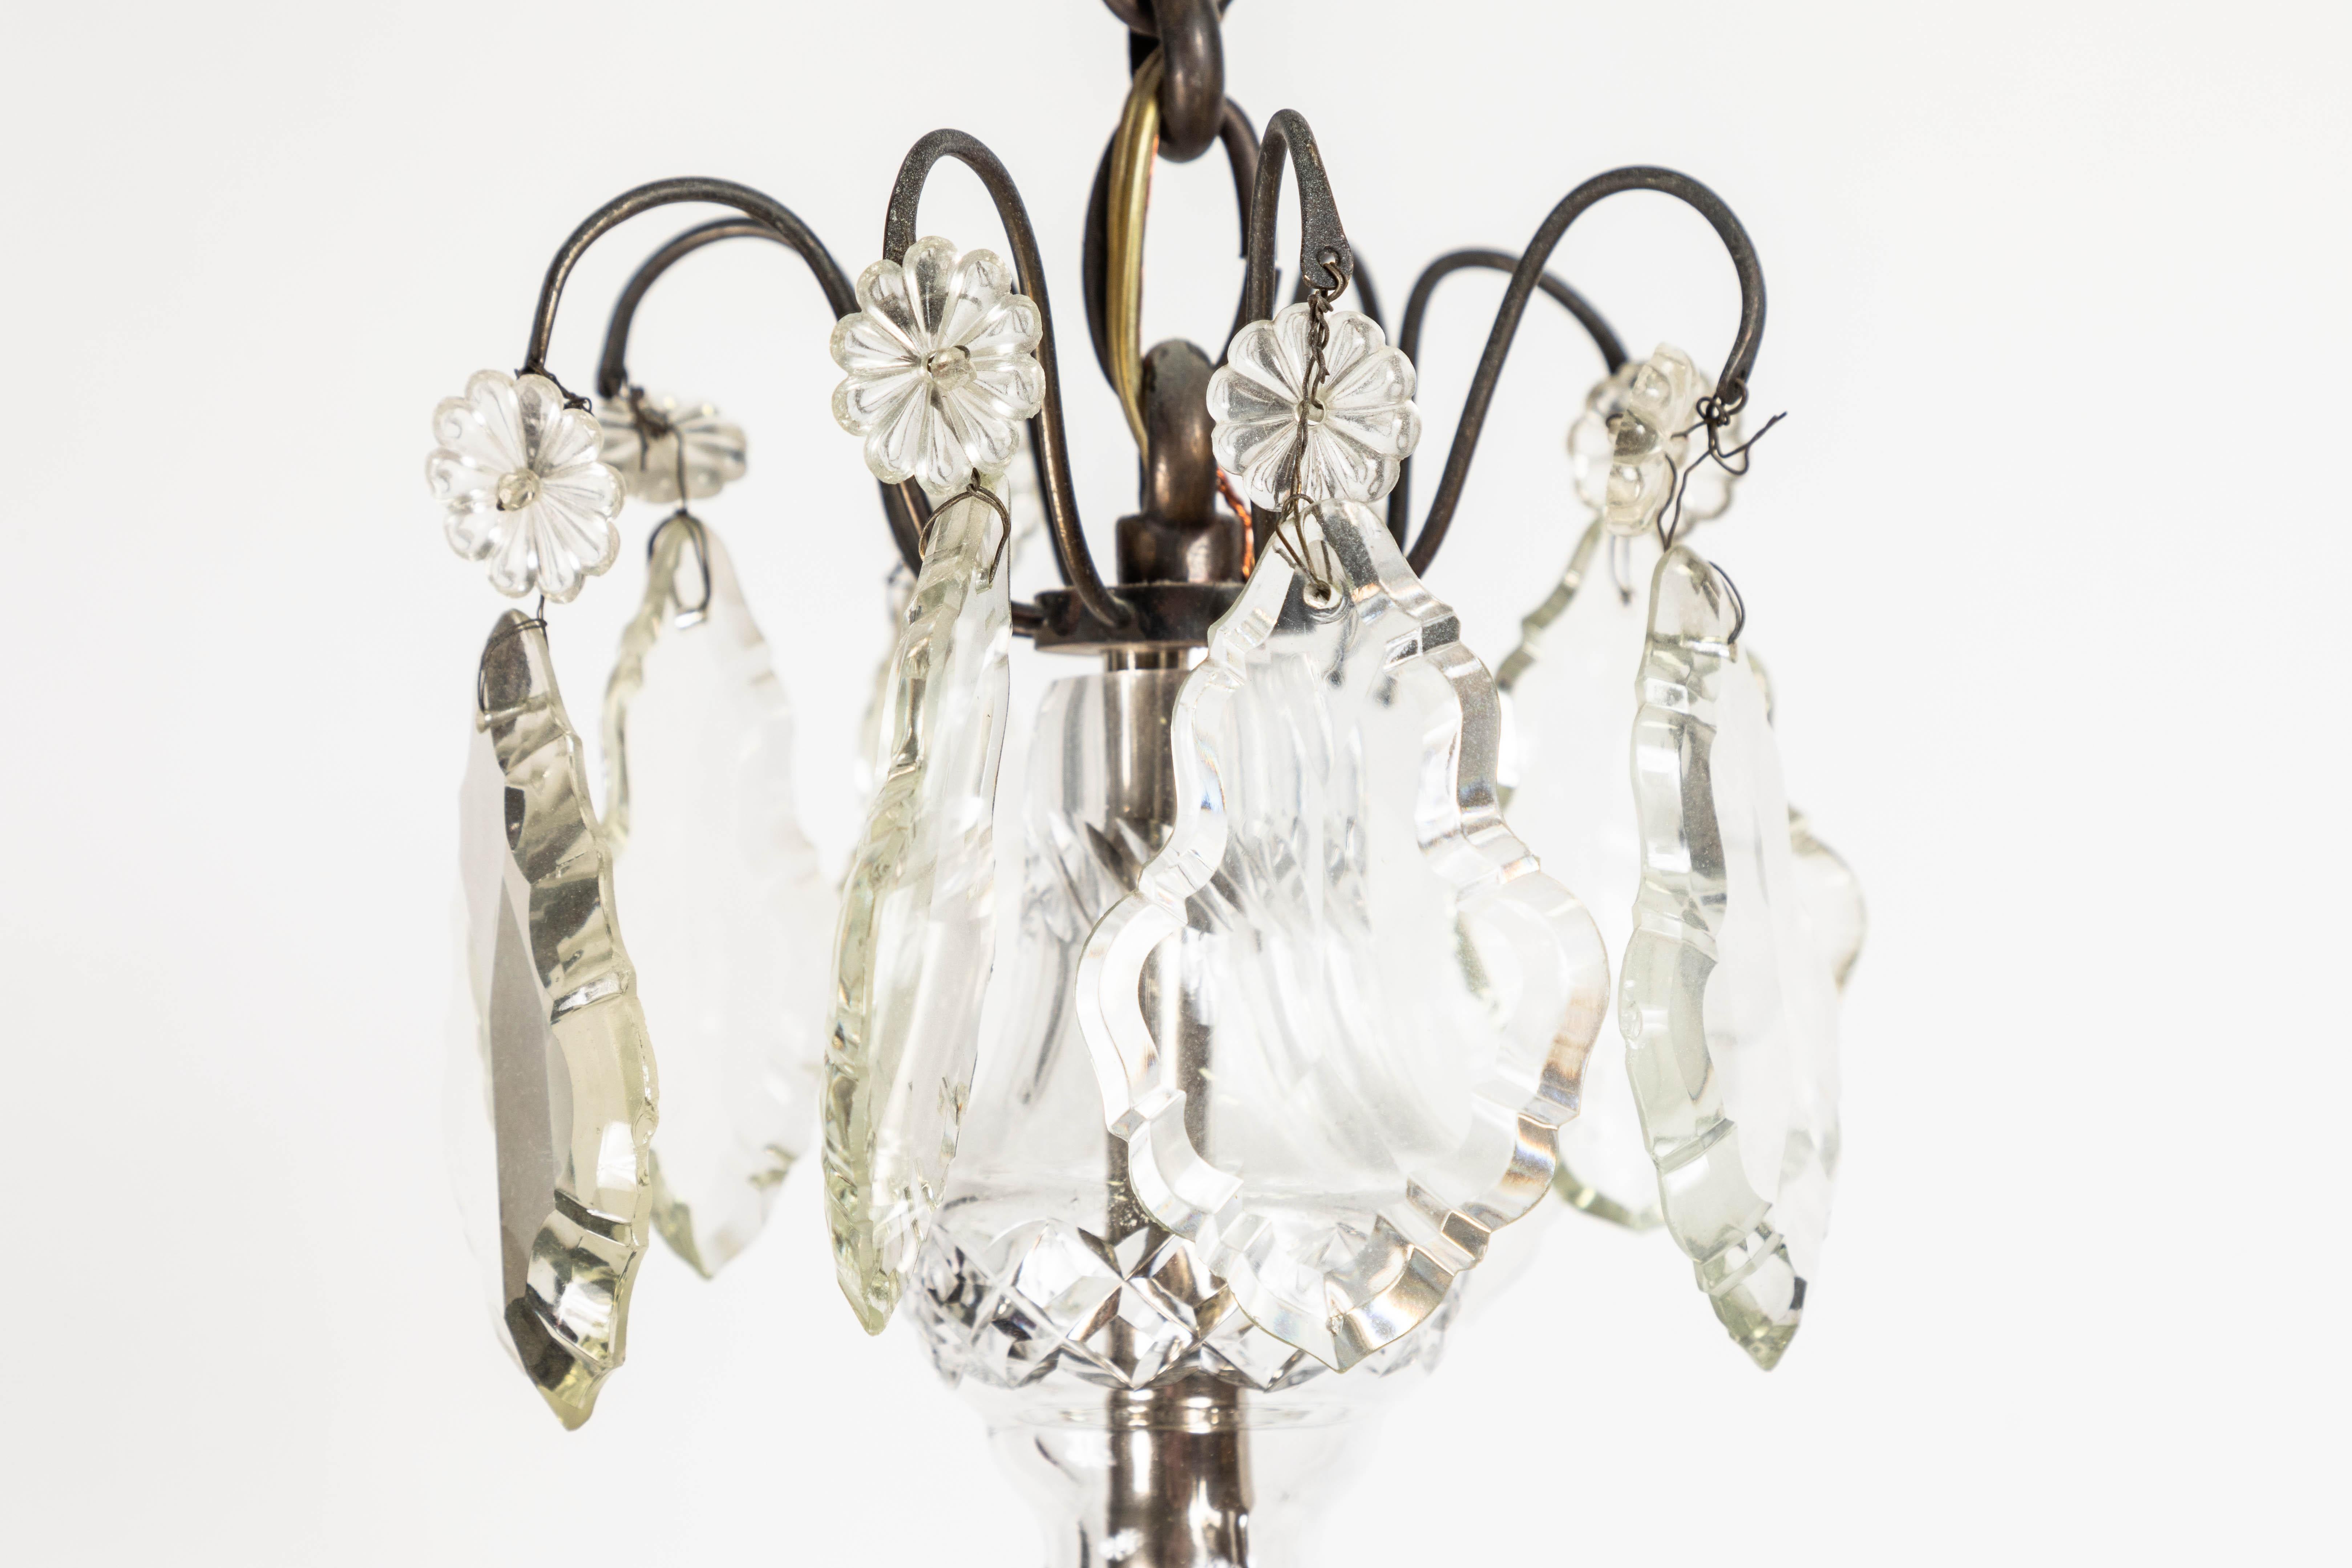 19th century French Rococo style bronze 8-light chandelier with hand cut crystals. 19